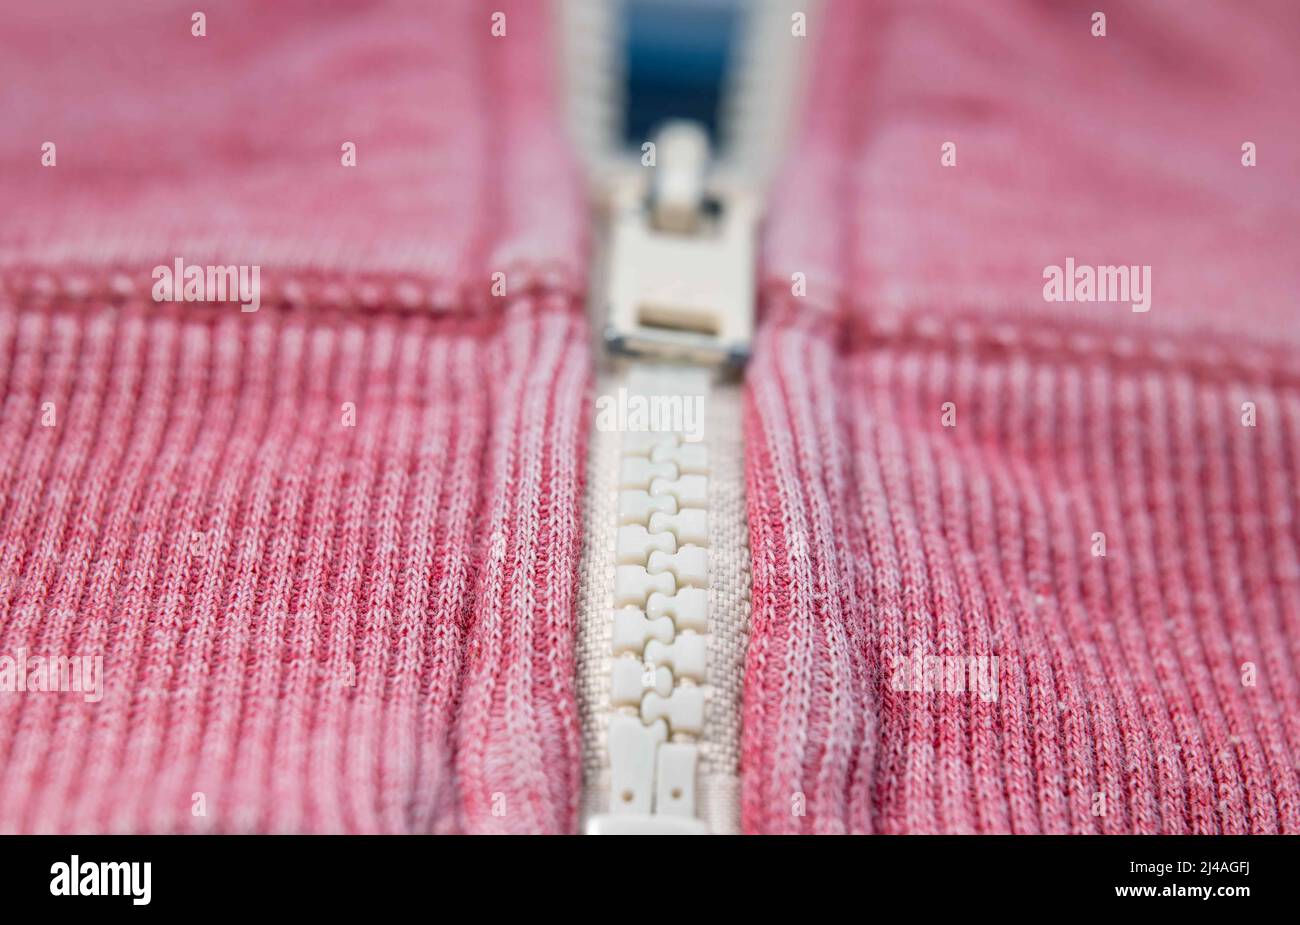 Worn, faded red jacket with zipper, close up Stock Photo